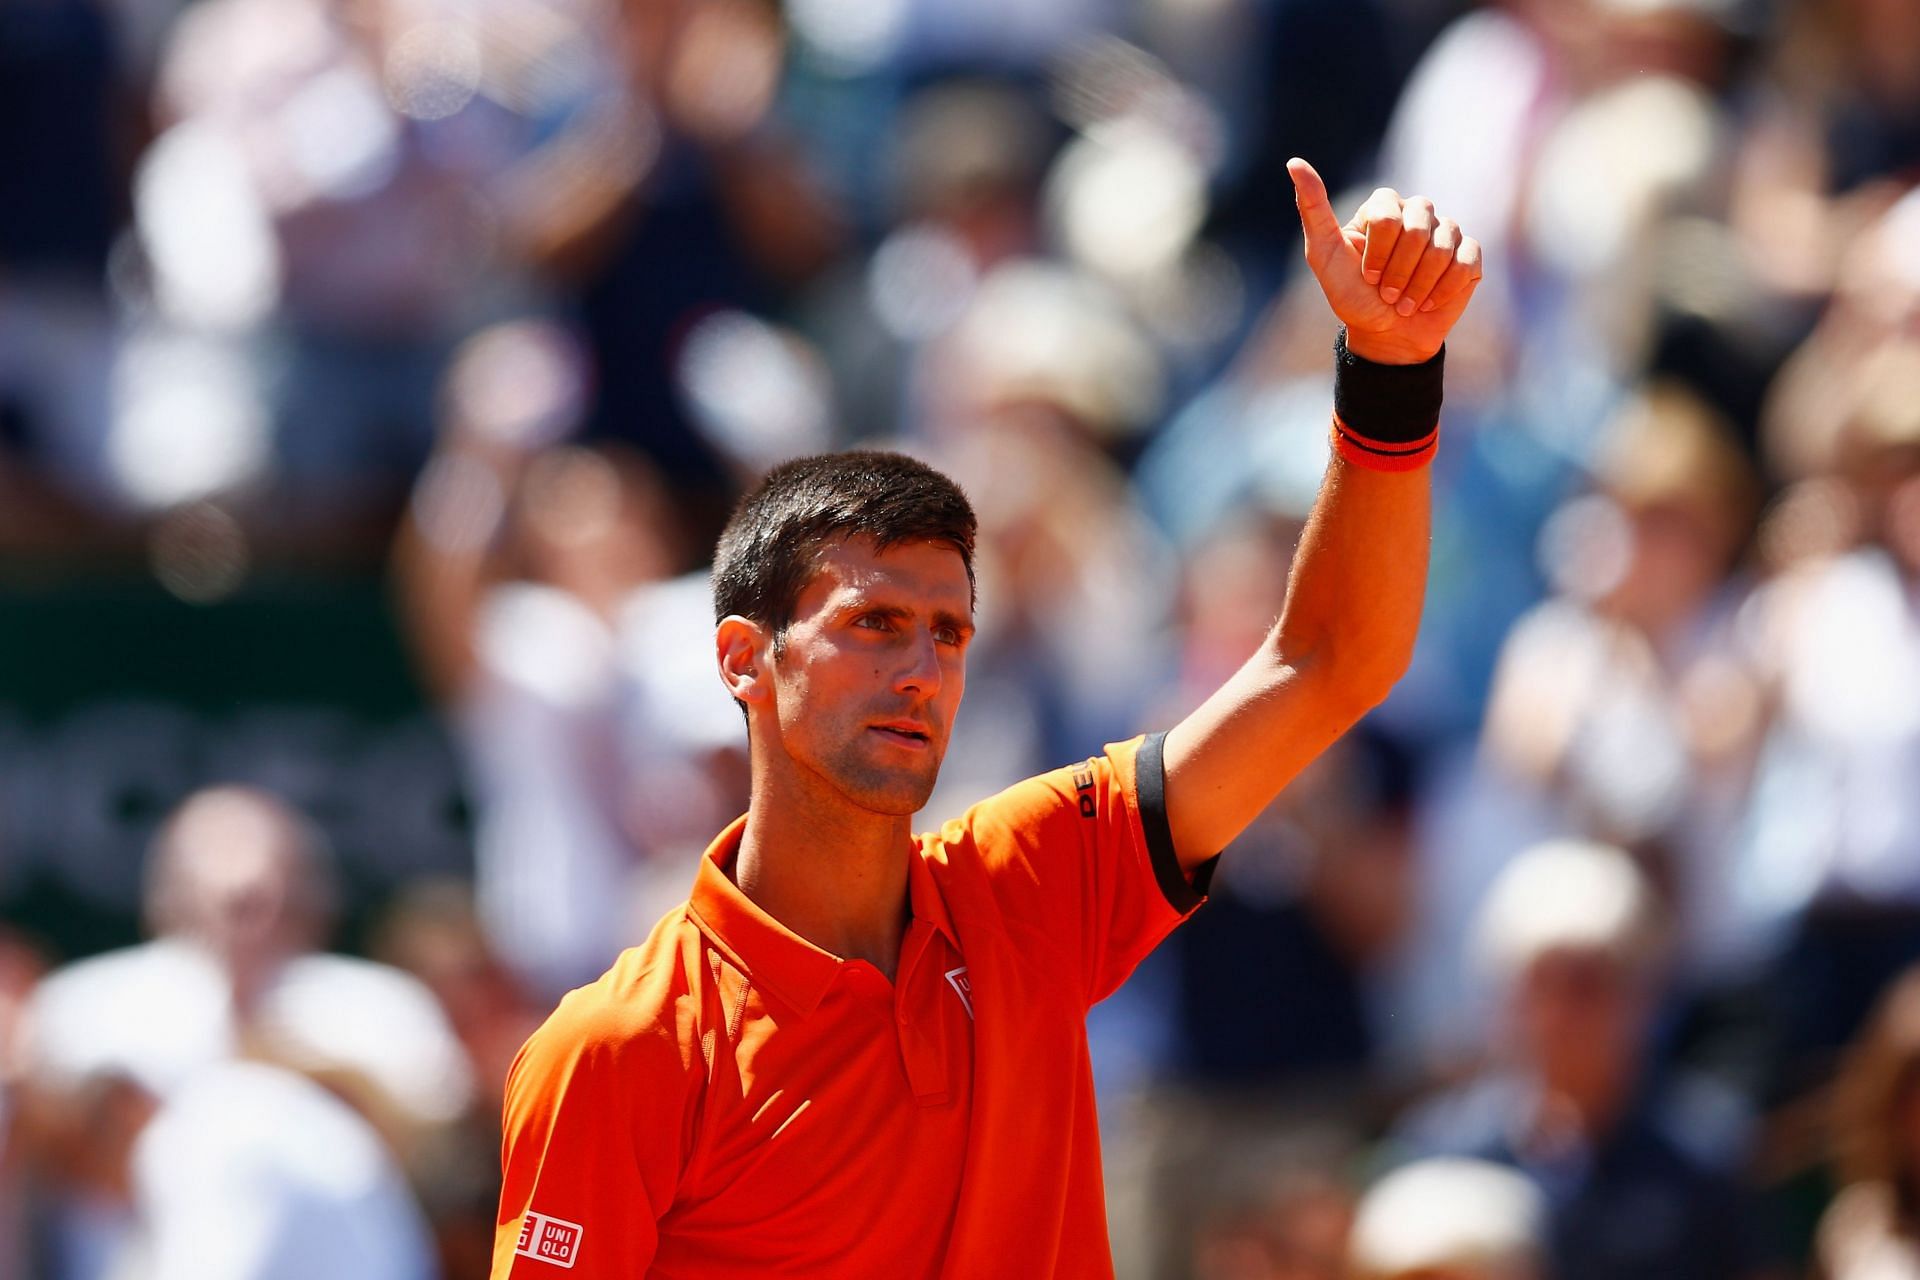 Djokovic pictured at the 2015 French Open